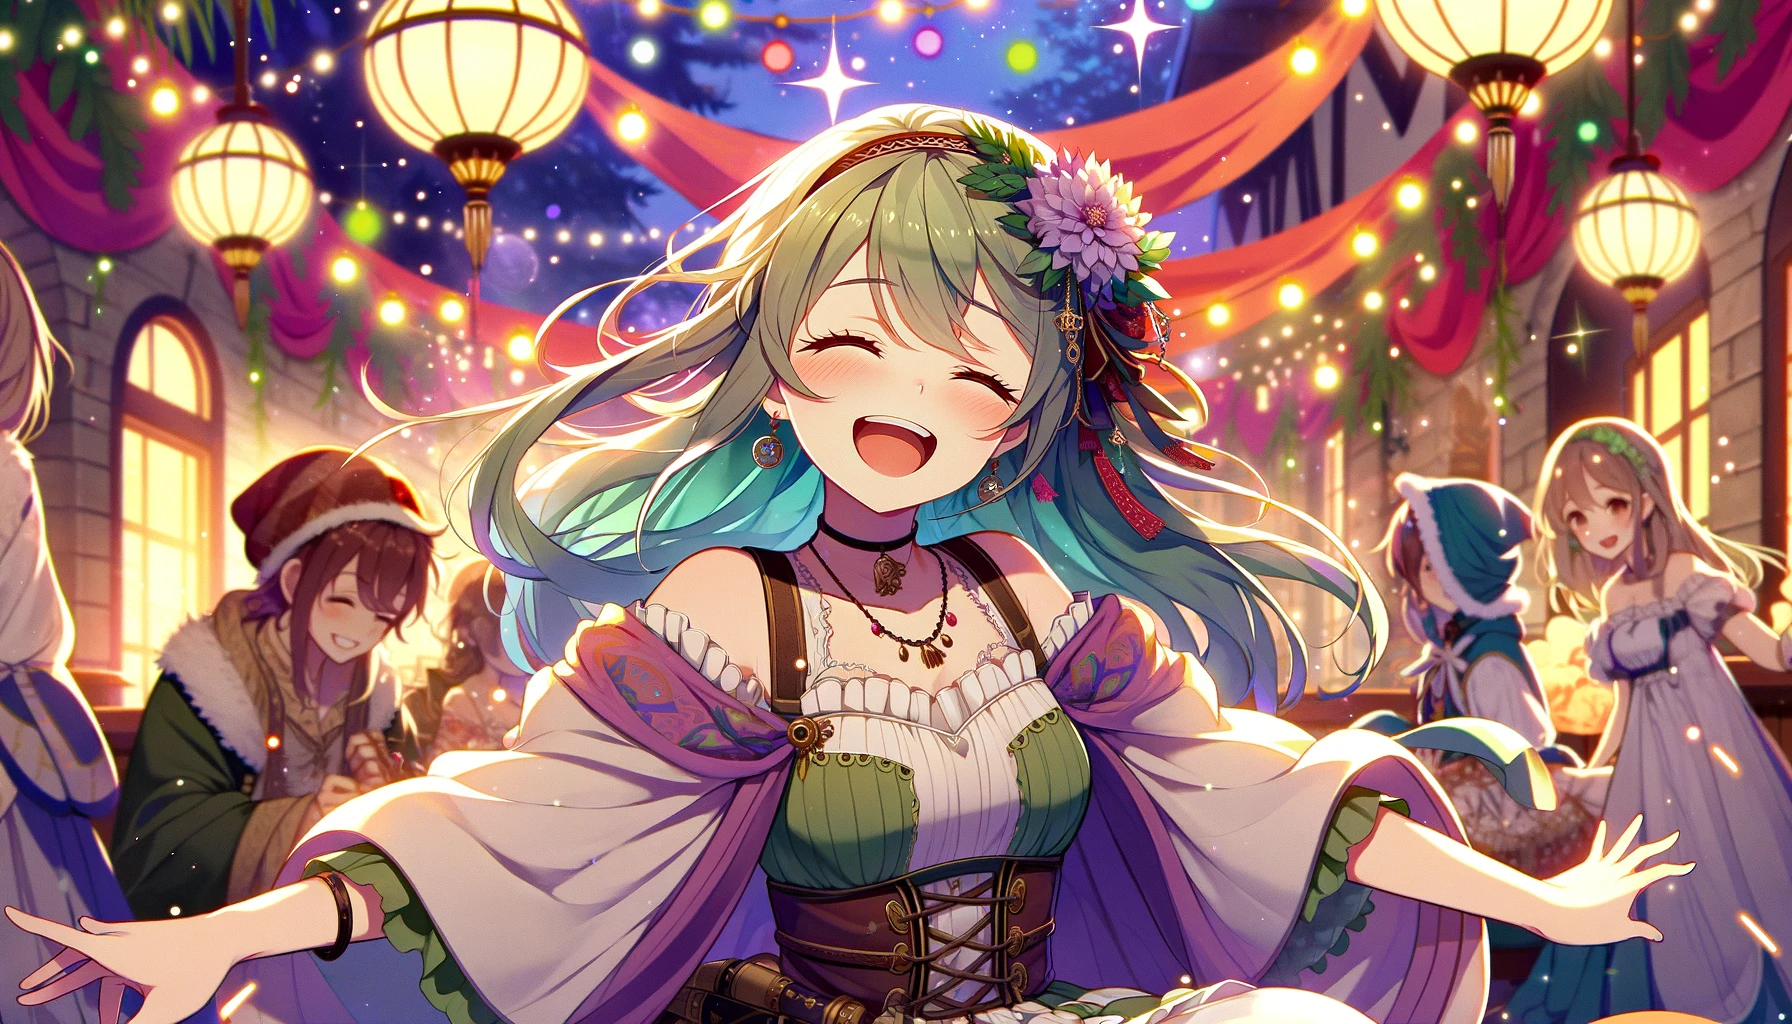 Anime 1792x1024 magician anime girls anime digital art AI art bare shoulders closed eyes open mouth flower in hair stars long sleeves wide sleeves necklace earring sky jewelry flowers sky lanterns blushing long hair smiling lantern frills